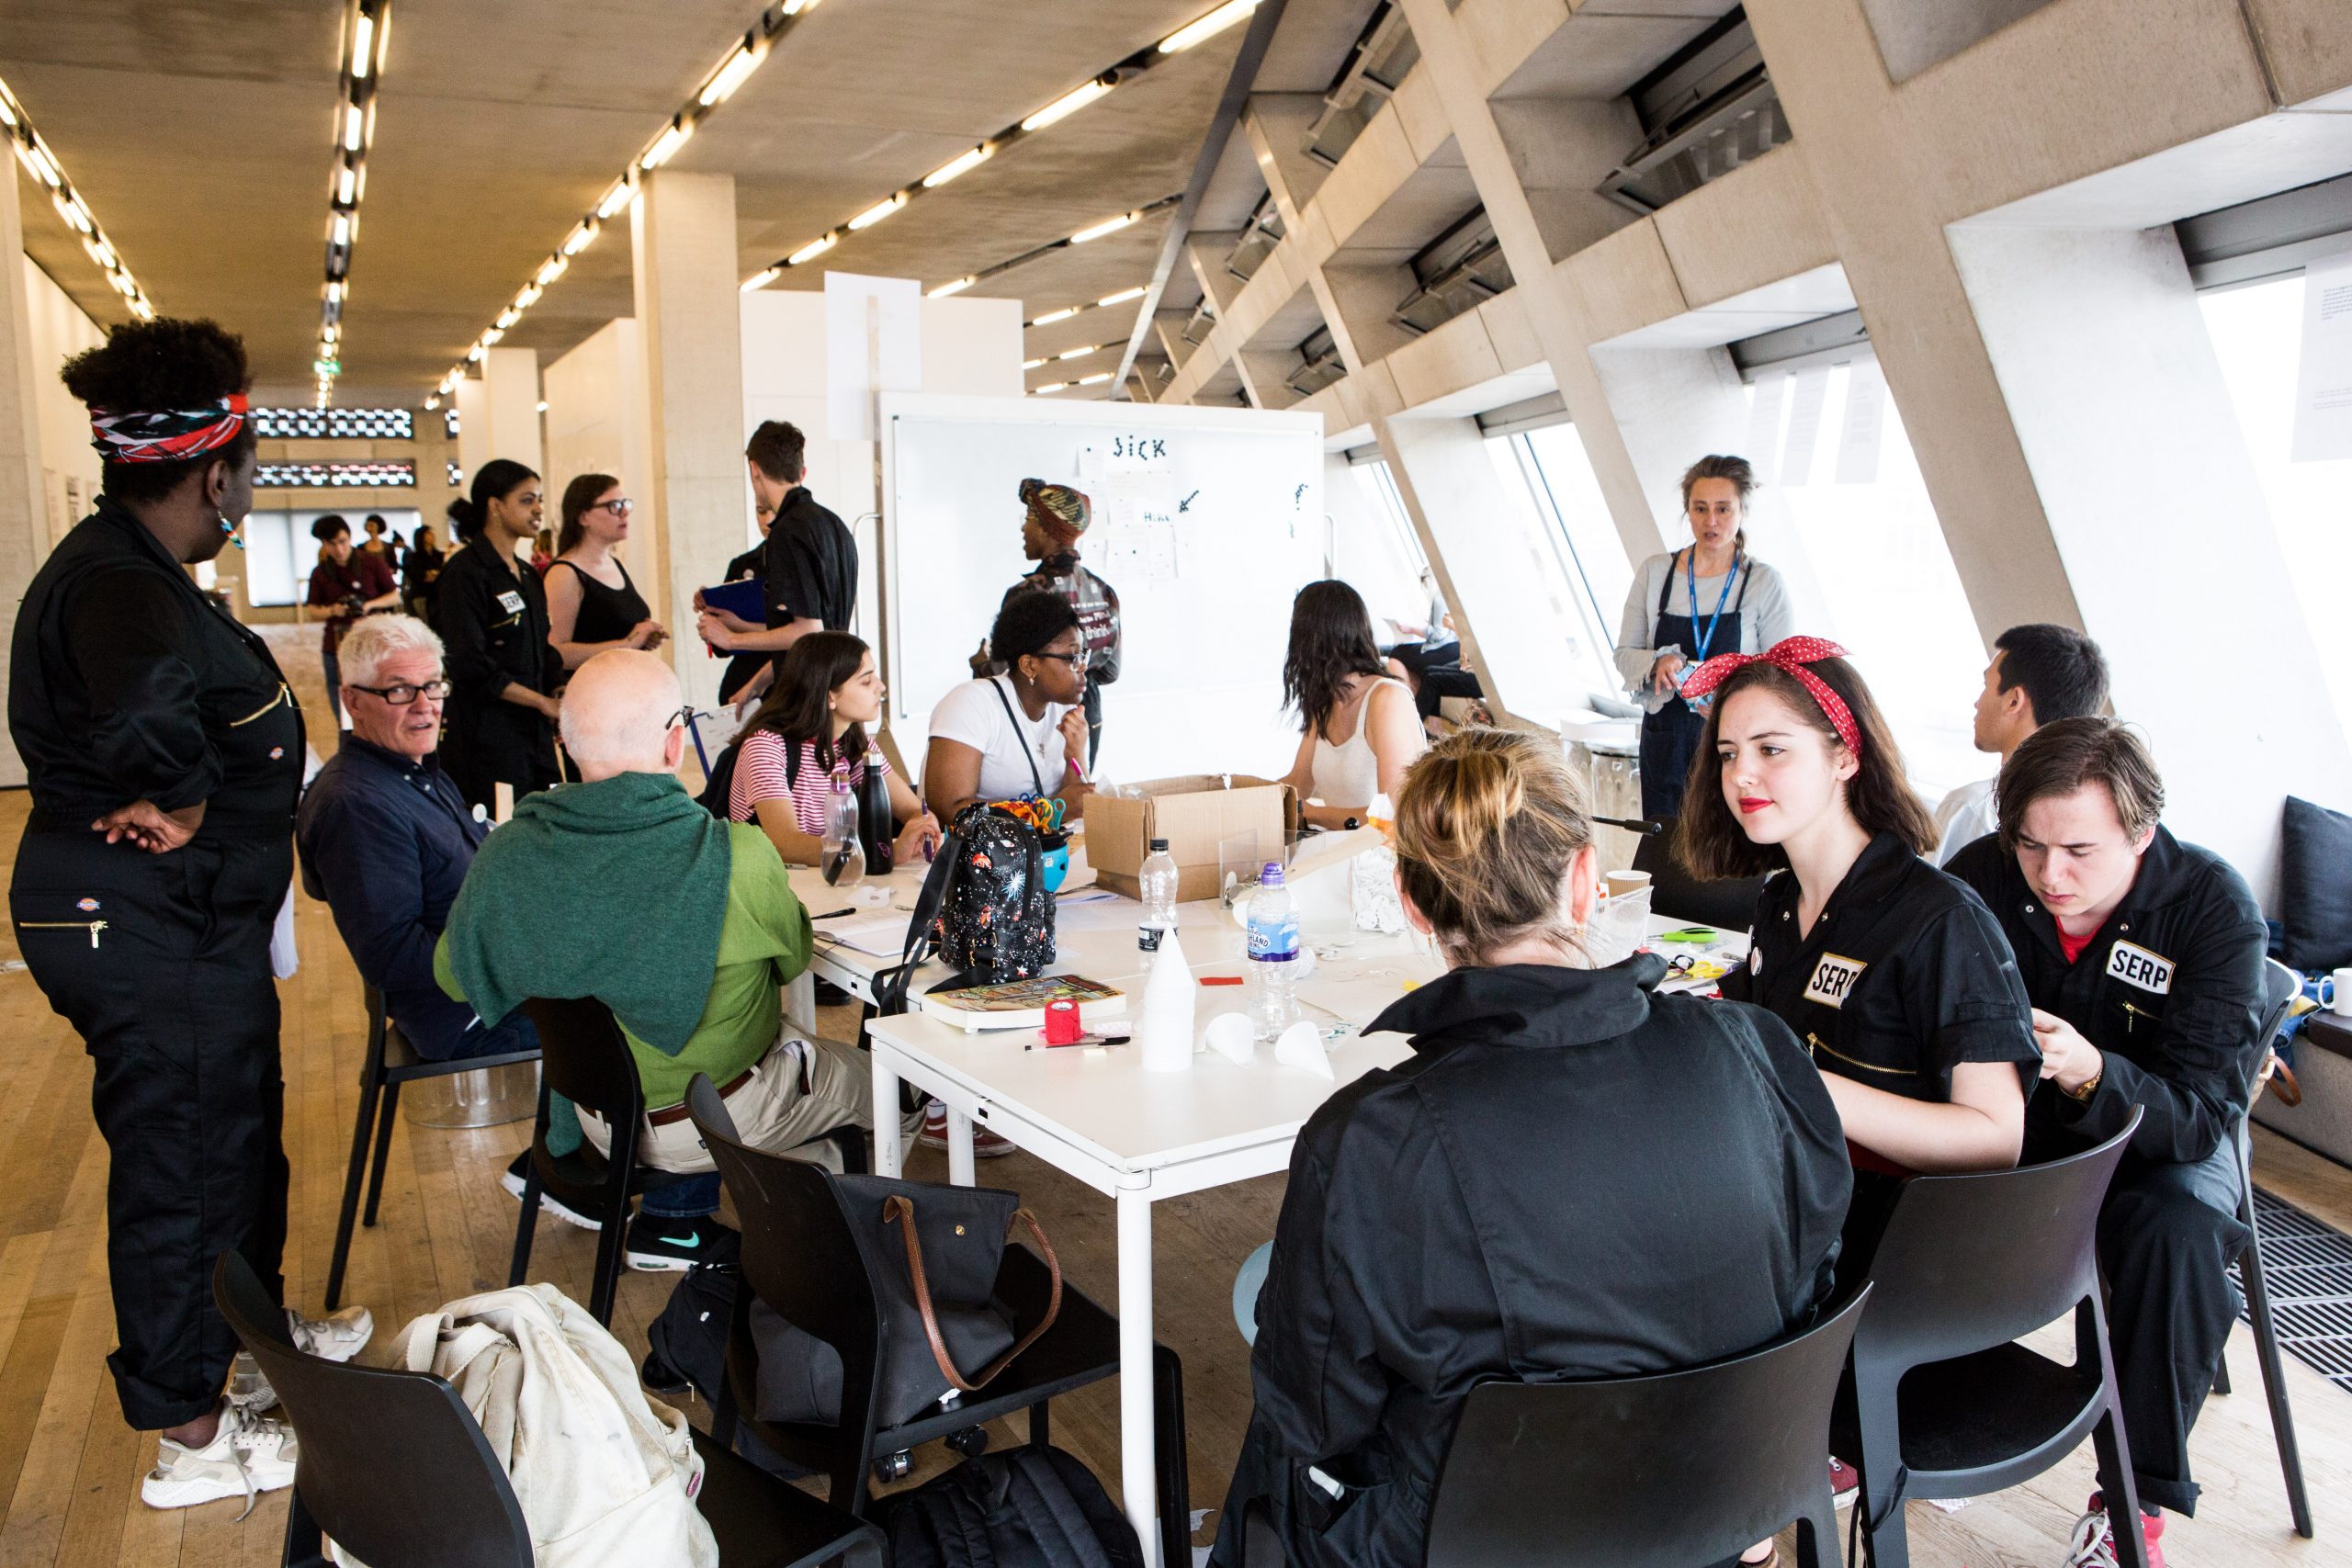 image of a group of people taking part in an art session around a table with Peckham Platforme